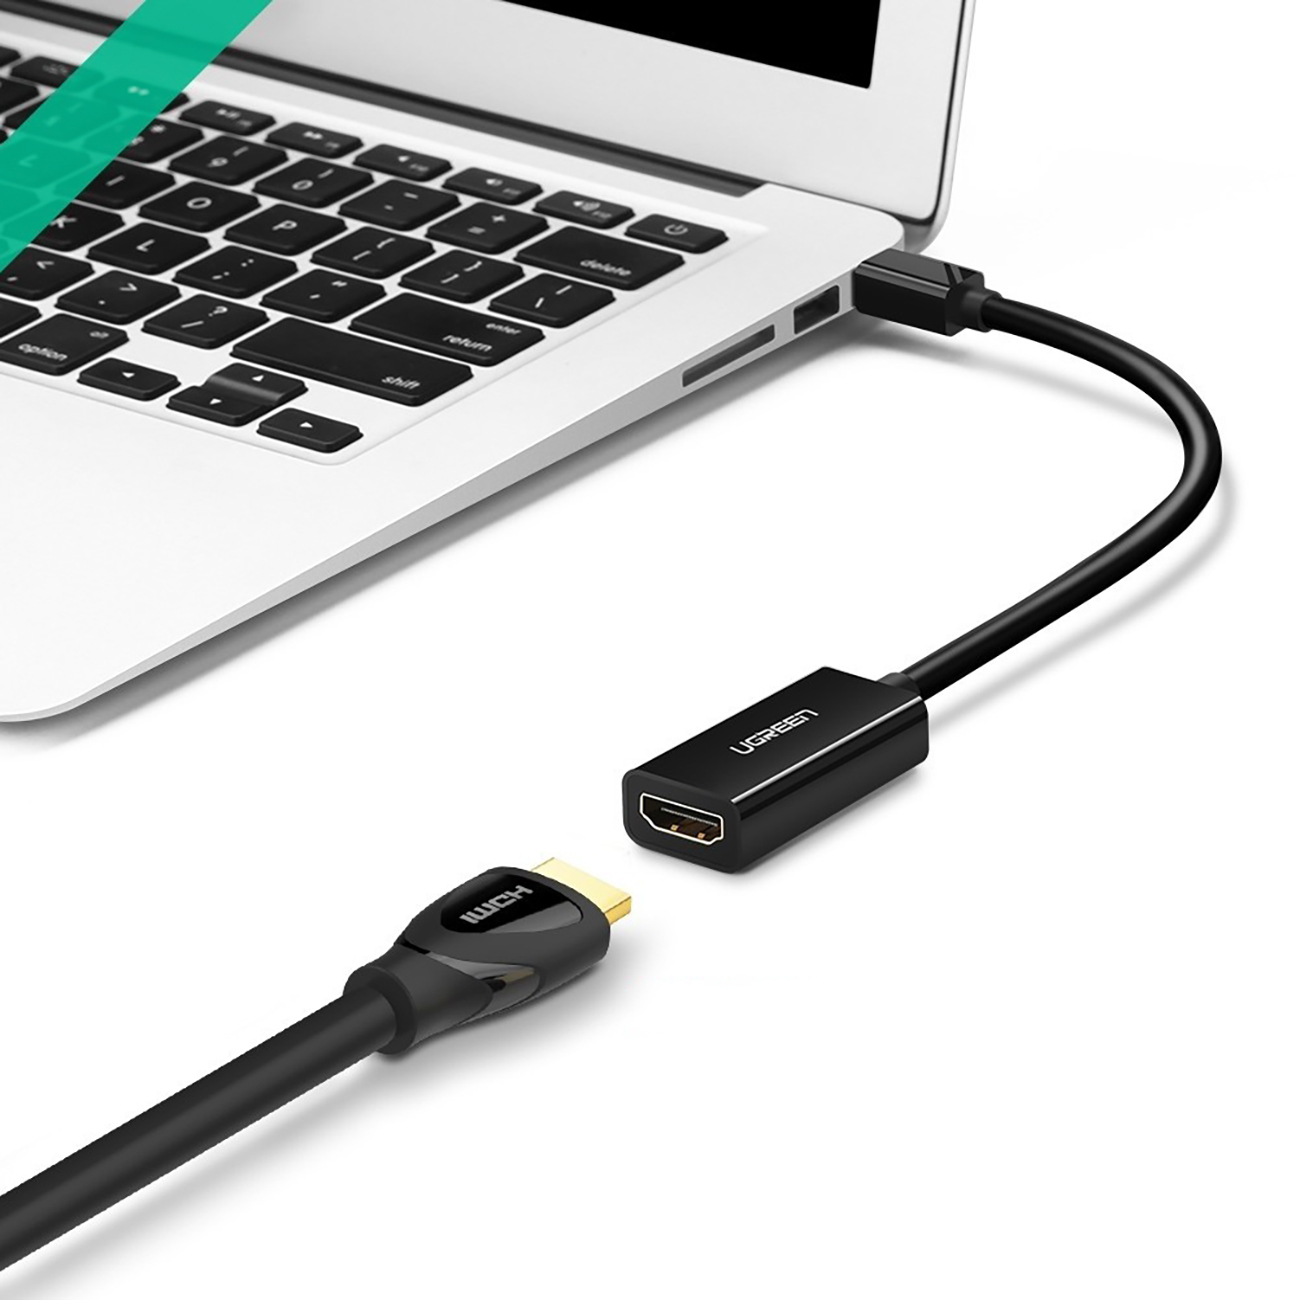 Macbook with connected Ugreen MD112 adapter with mini DisplayPort (male) and HDMI (female) connectors with Full HD 1080p resolution